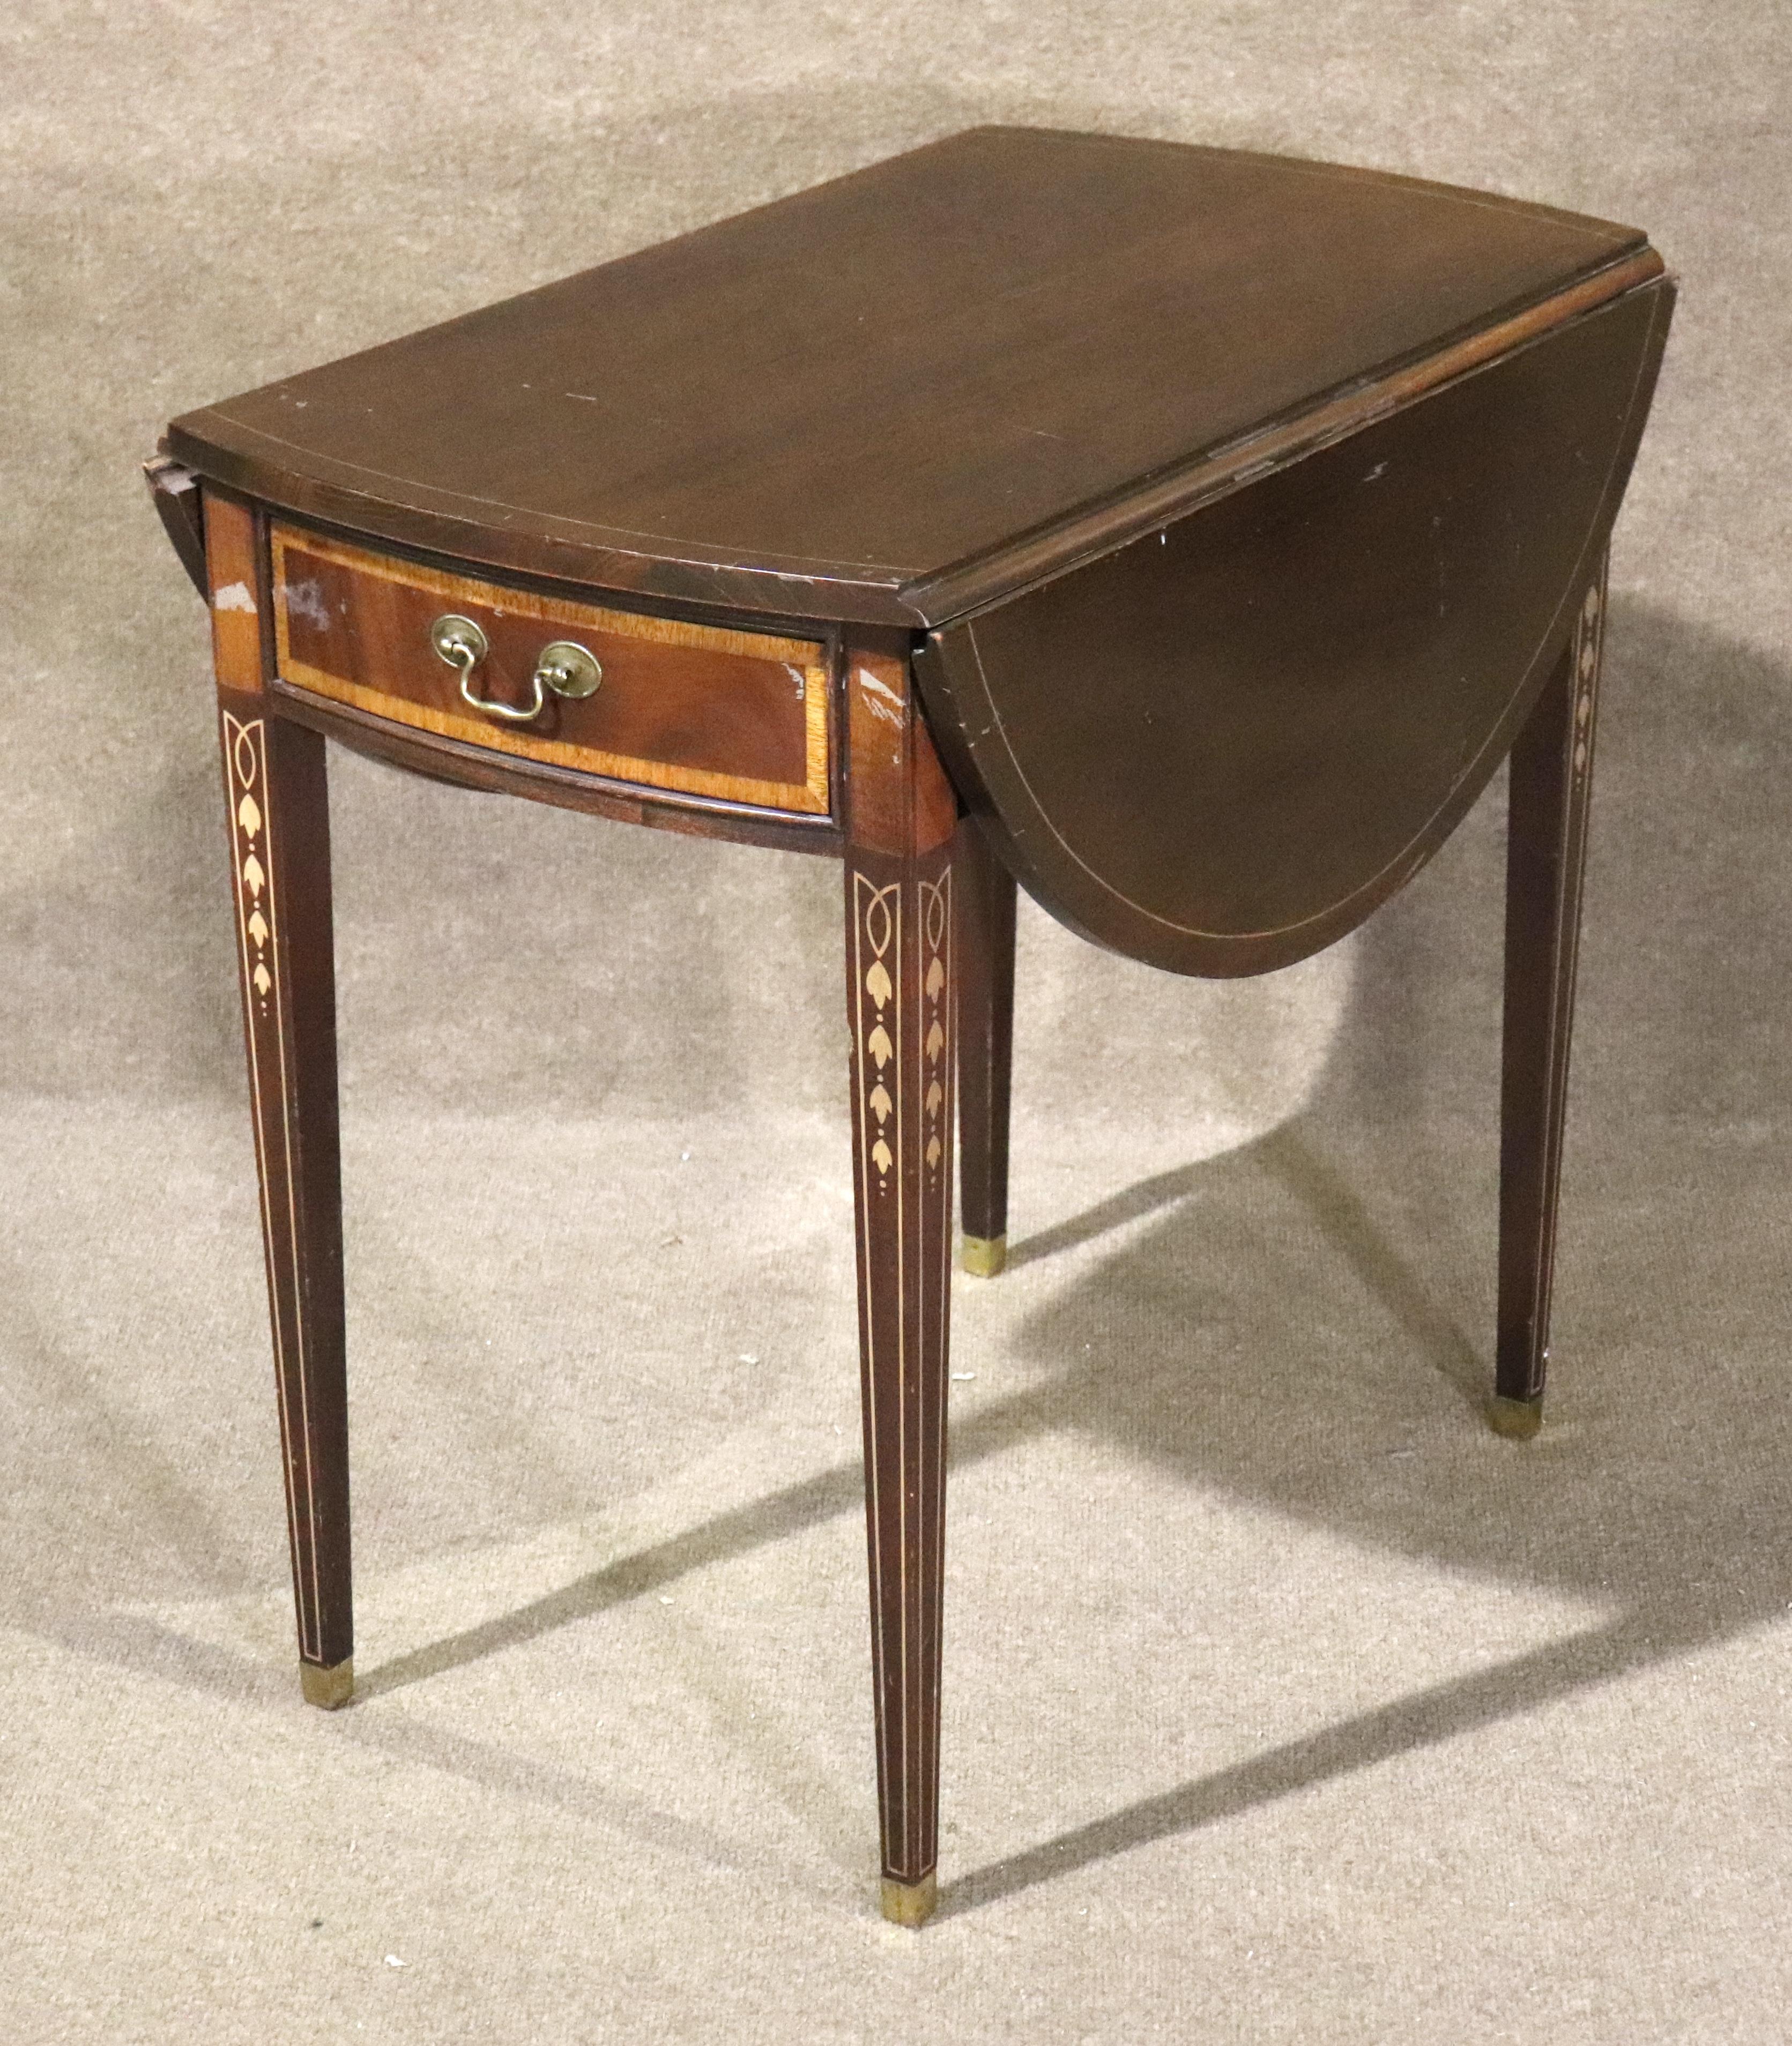 This side table is decorated with inlaid wood design throughout, with two drop leaves and center drawer. Beautiful art nouveau design on each leg. This table is great for entertaining.
Please confirm location NY or NJ 